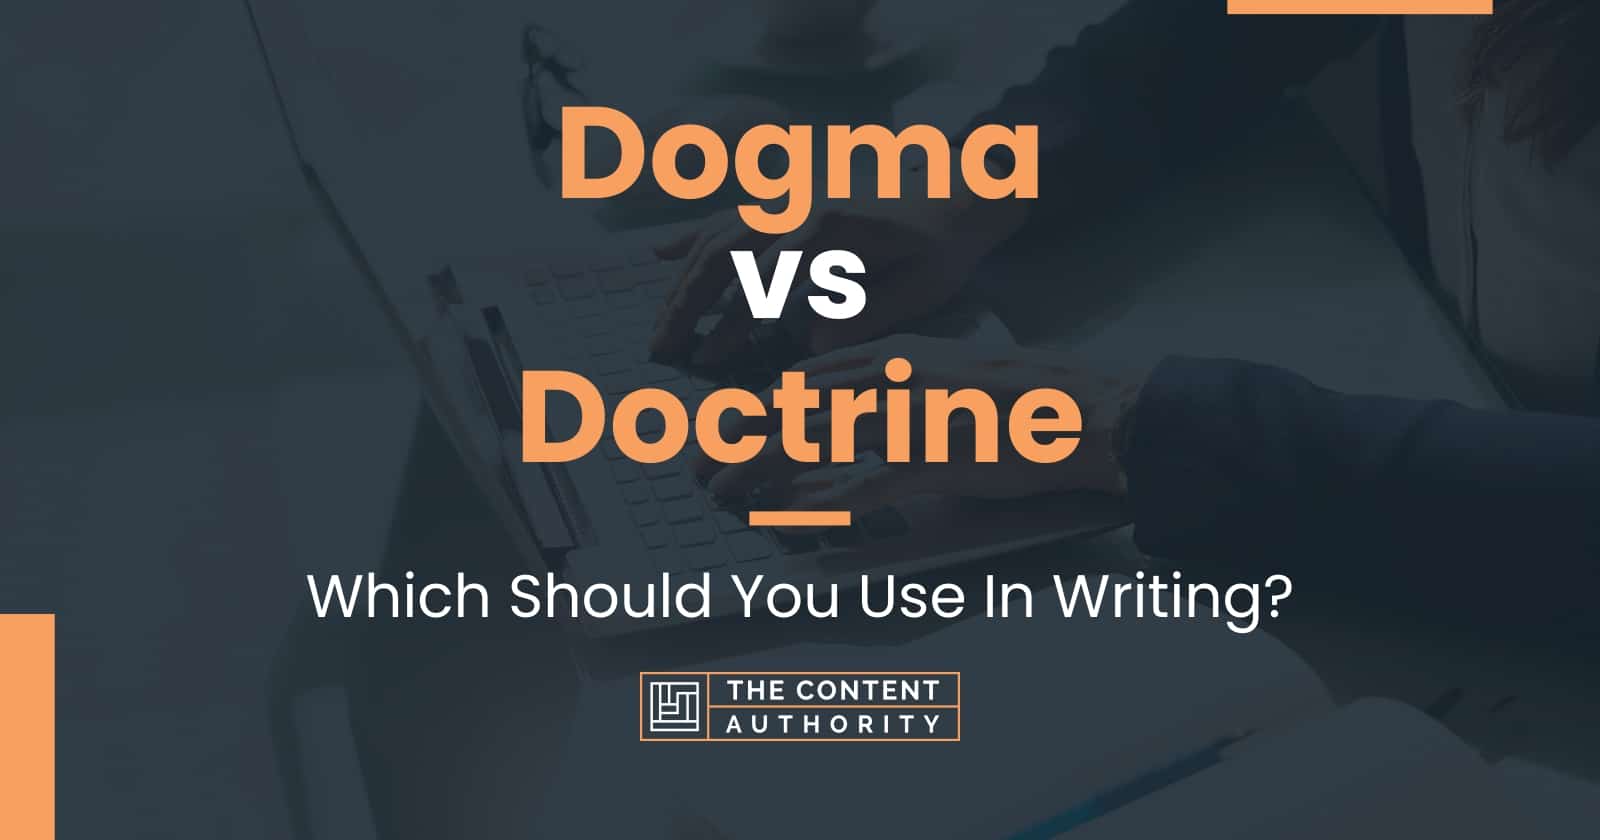 Dogma vs Doctrine: Which Should You Use In Writing?